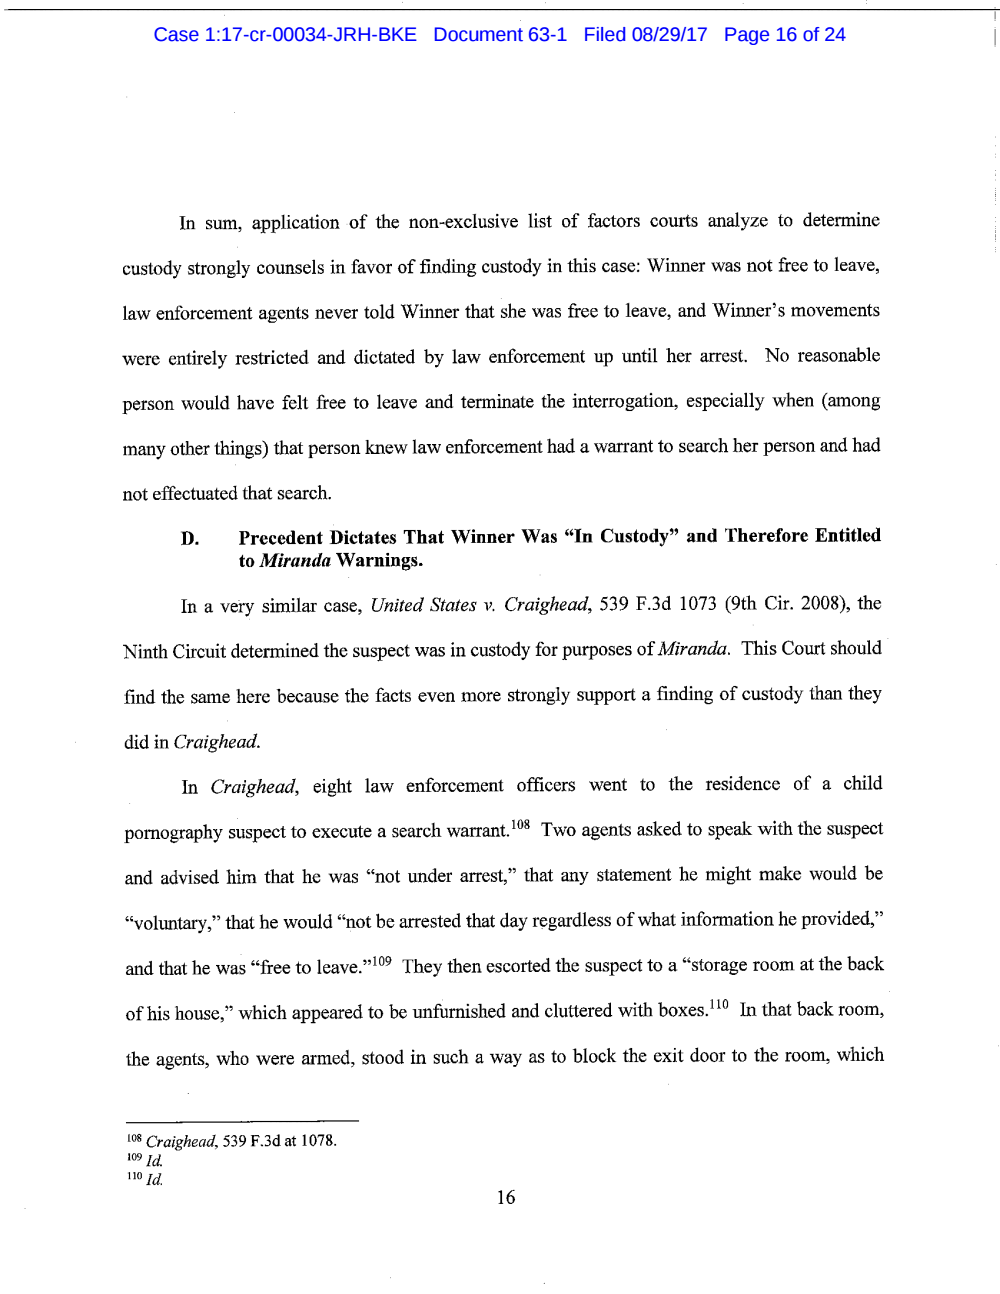 Page 16 from Reality Winner Memo in Support of Motion to Suppress